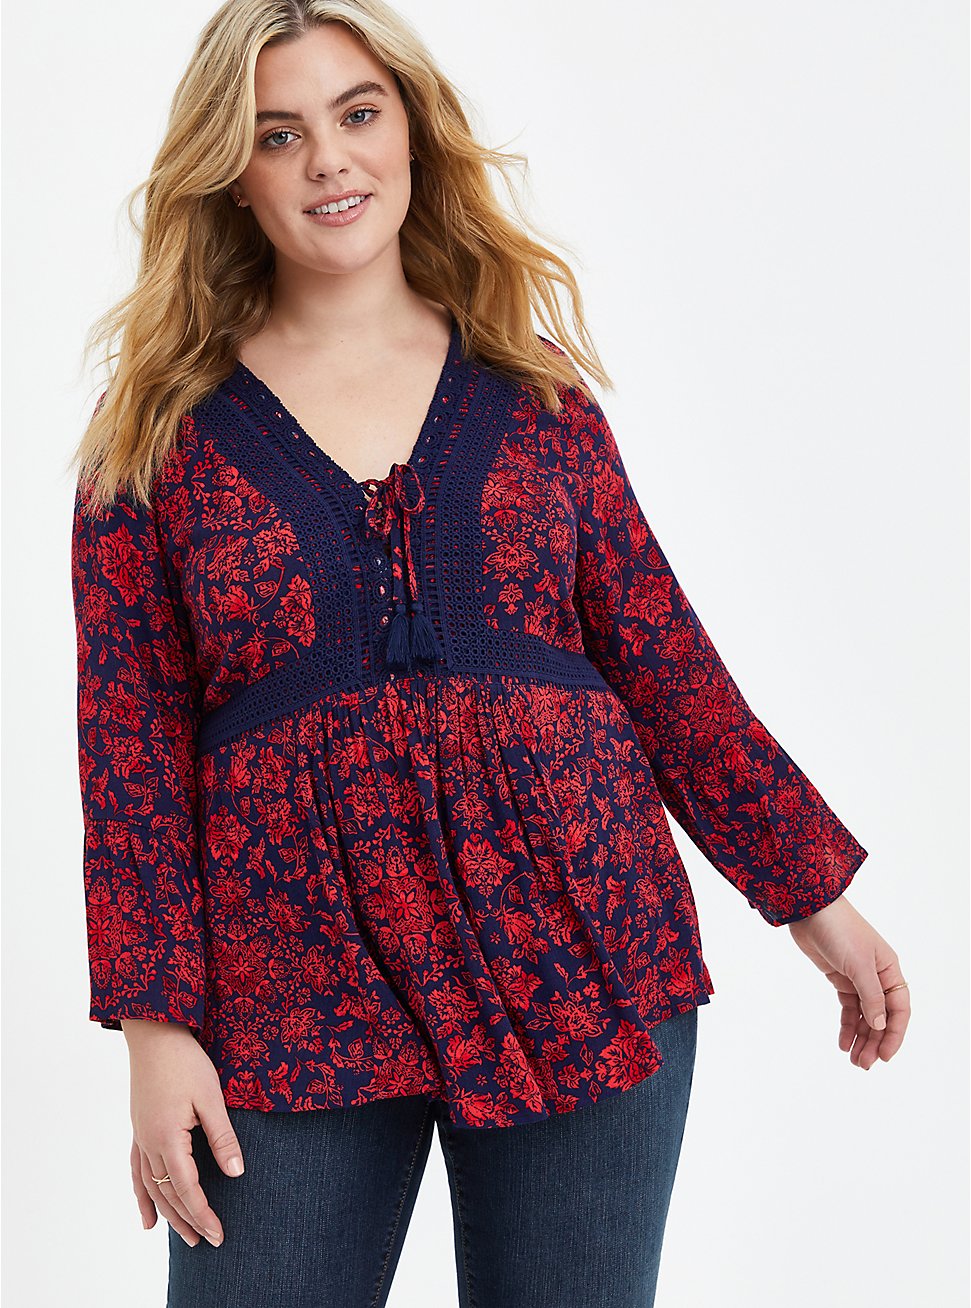 Plus Size Lace-Up Babydoll Top - Crinkle Gauze Floral Red & Navy, OTHER PRINTS, hi-res